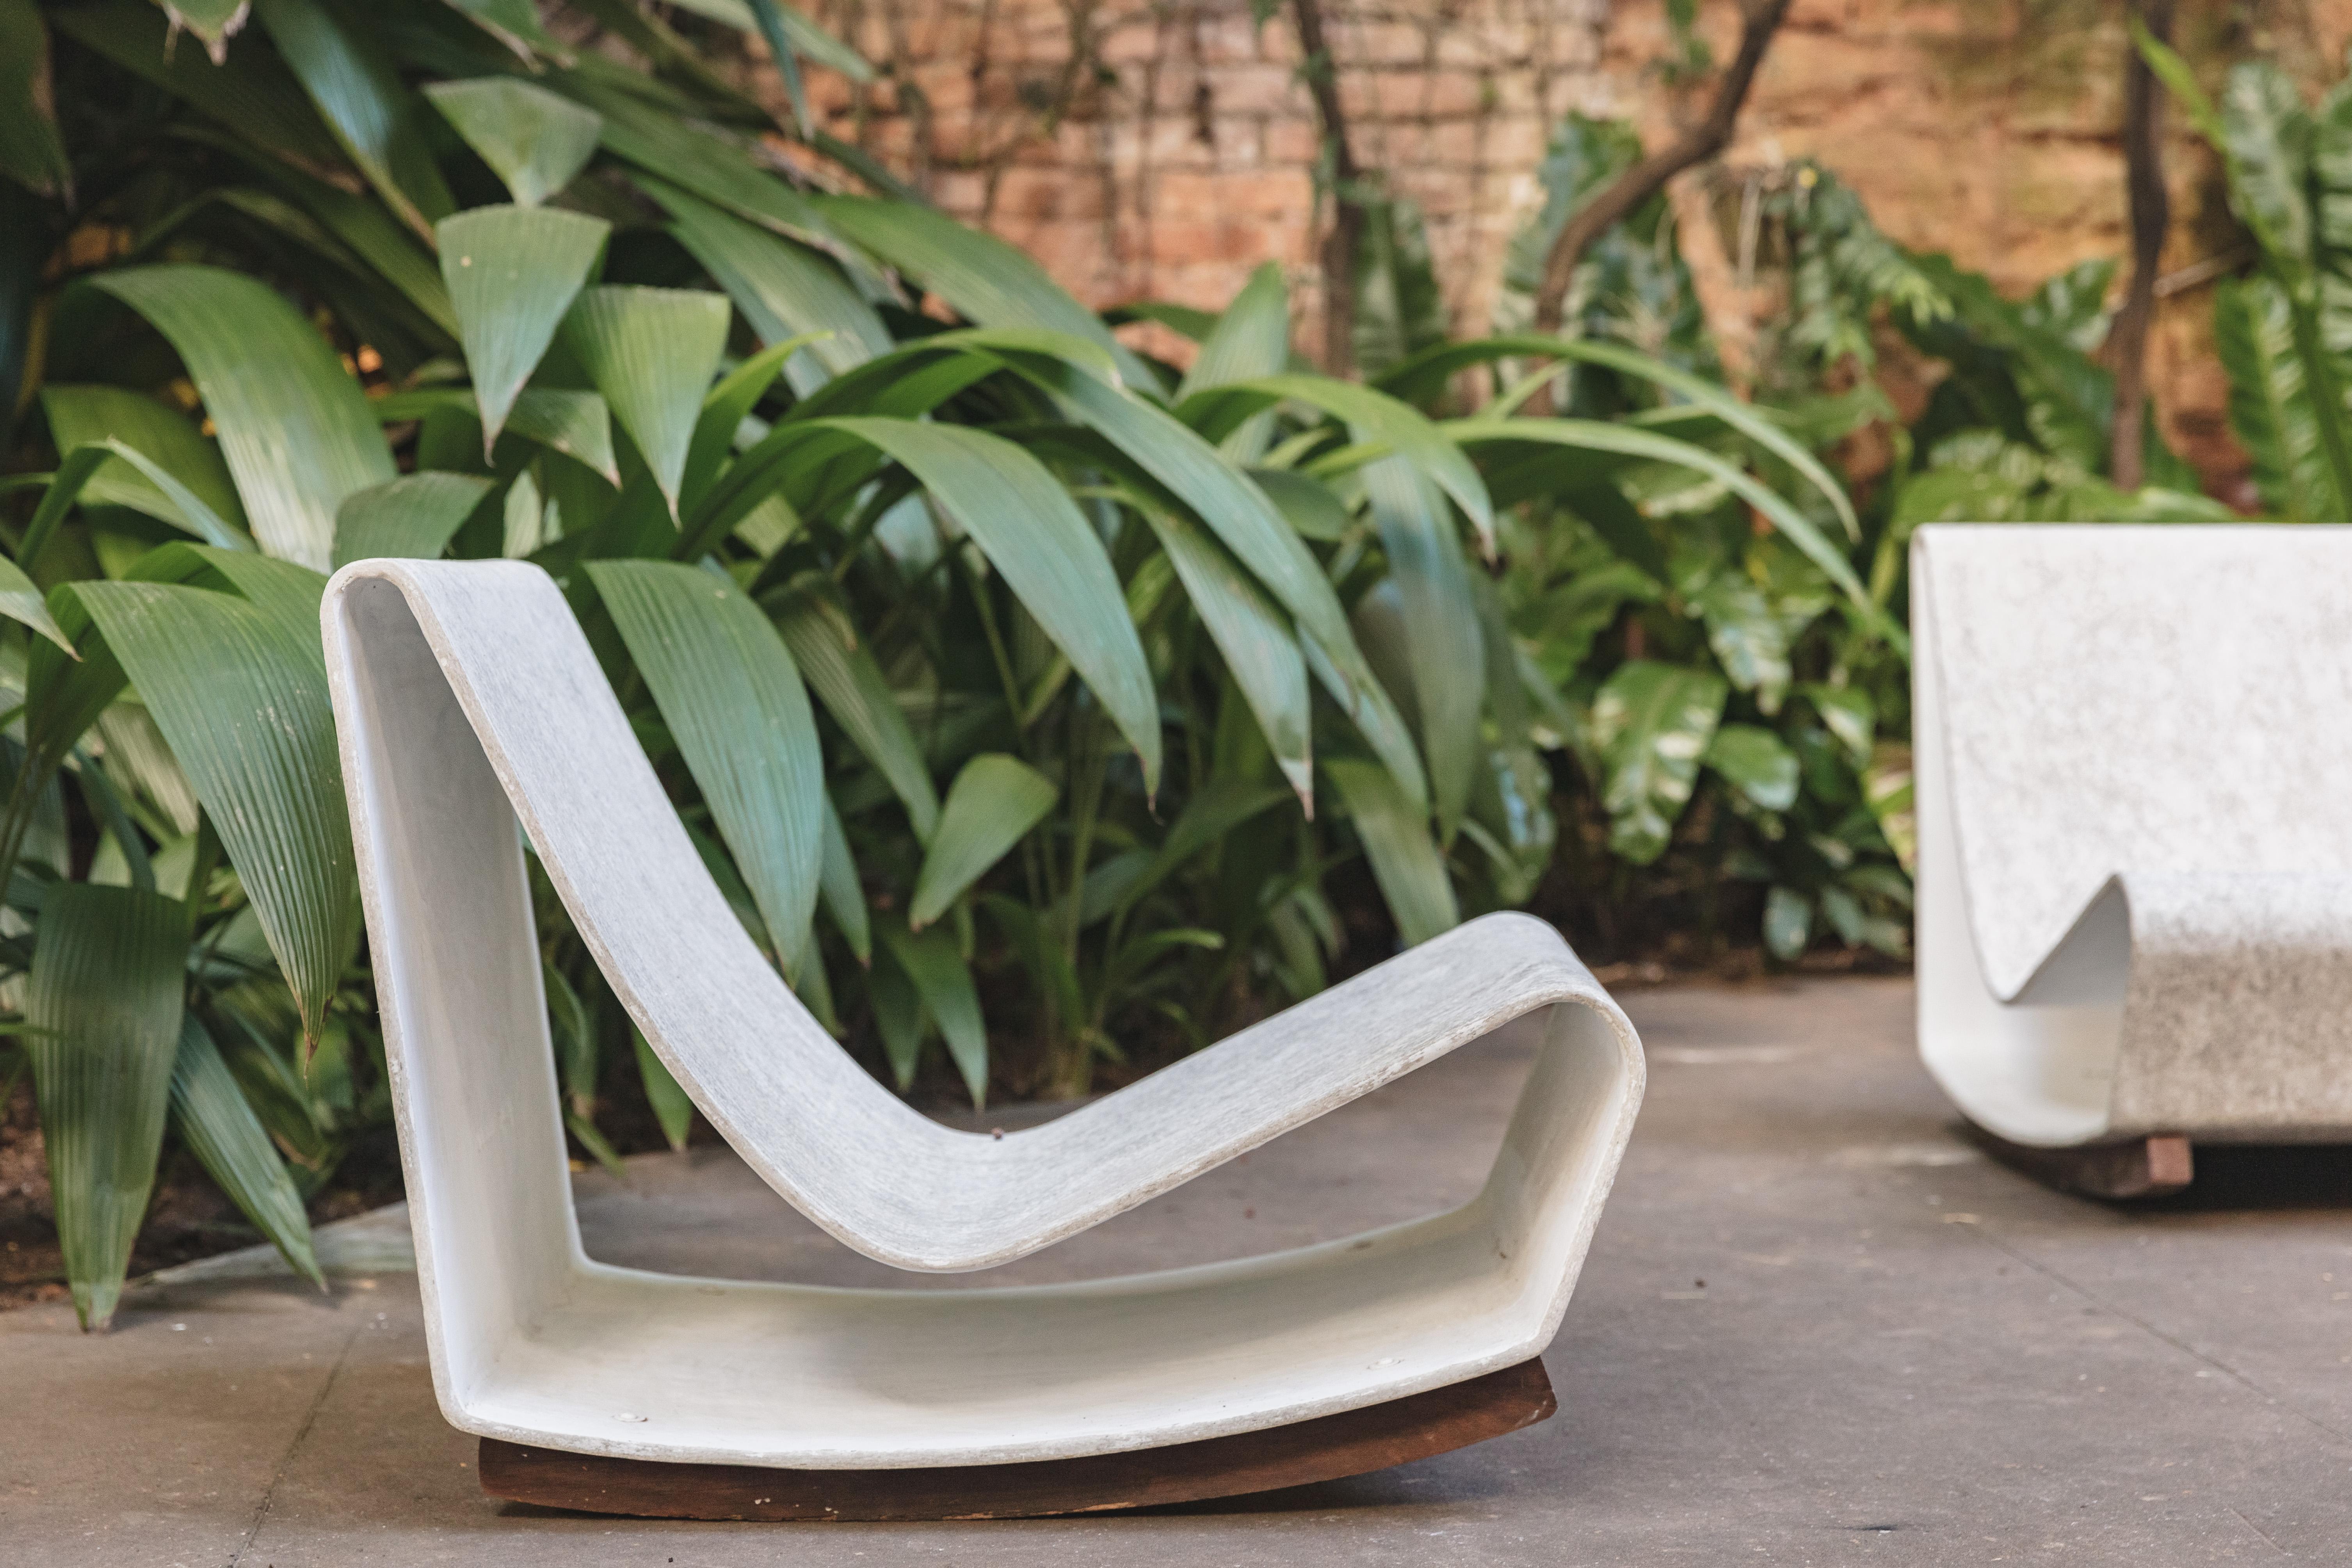 Pair of chairs designed by Willy Guhl with a shape of a loop, featuring a single volume of seats and backs. The Loop chair is suitable for both indoor and outdoor use. The “Loop Chair” was created in 1954 after Guhl watched as the Eternit panels